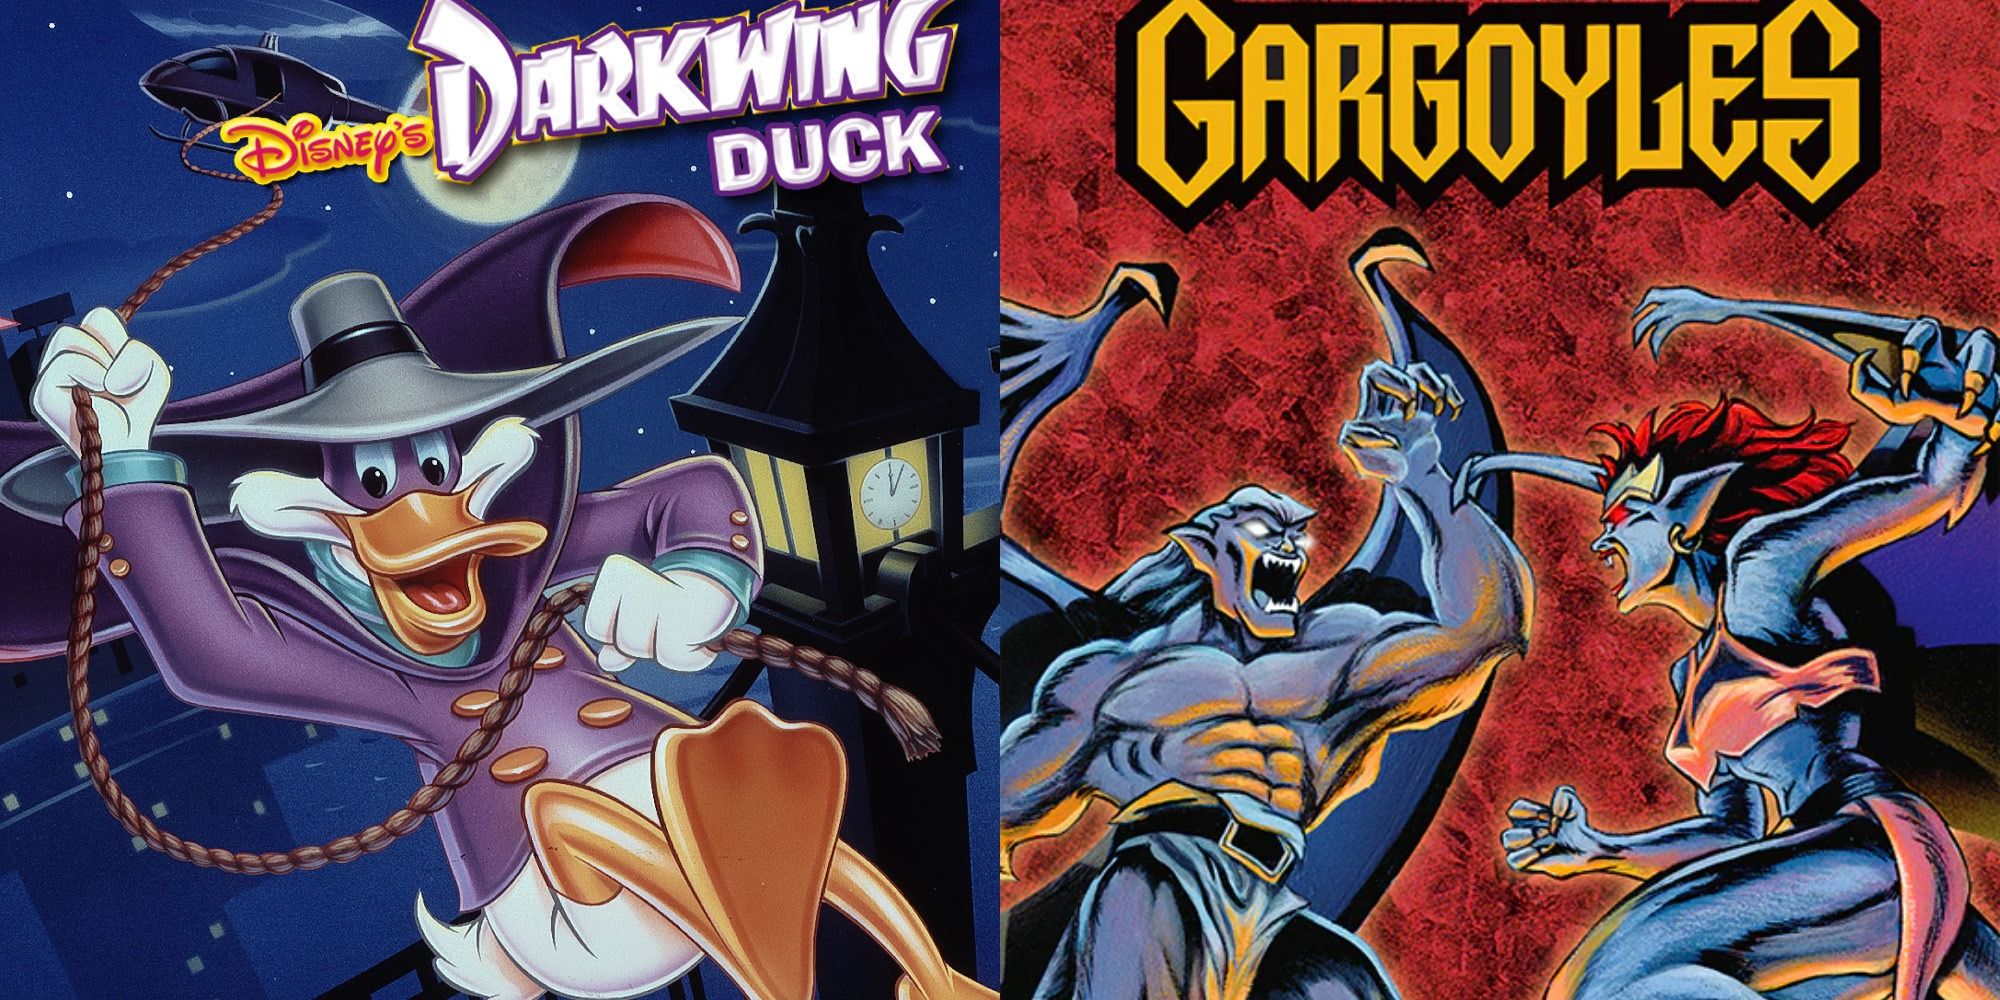 Split image showing posters for Darkwing Duck and Gargoyles